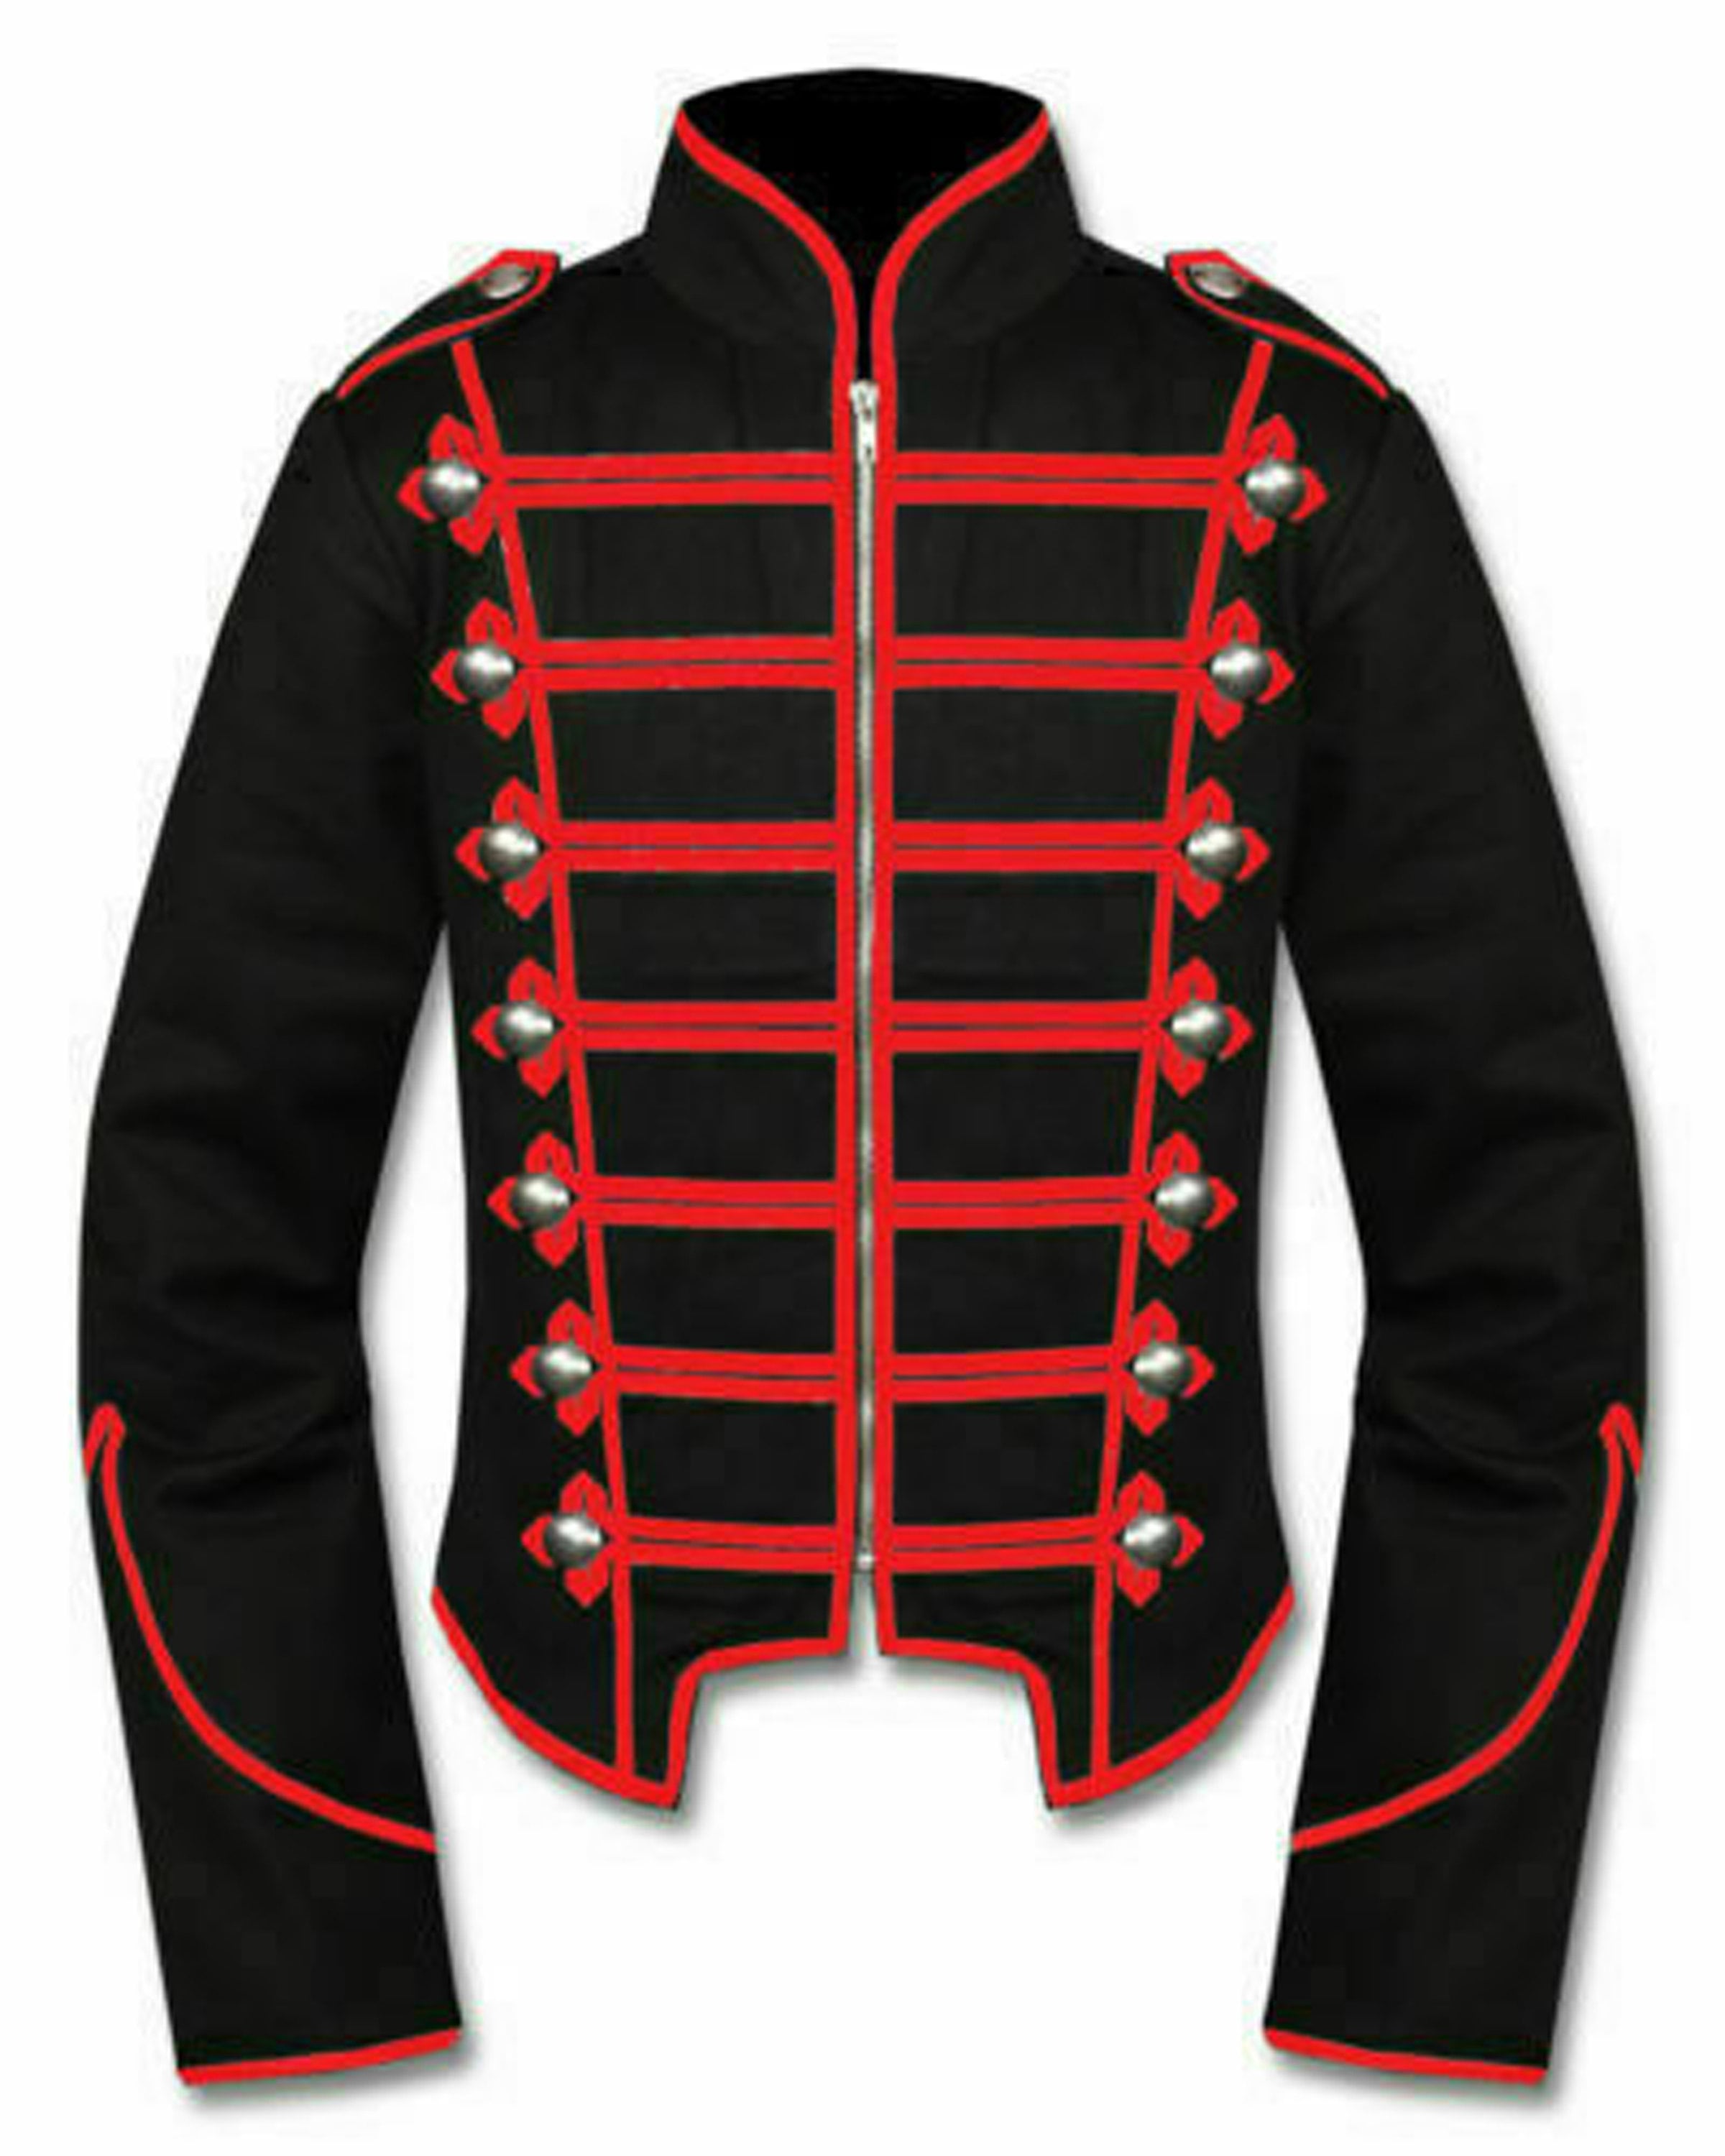  Ro Rox Men's Parade Jacket Marching Band Drummer Gothic  Tailcoat : Clothing, Shoes & Jewelry